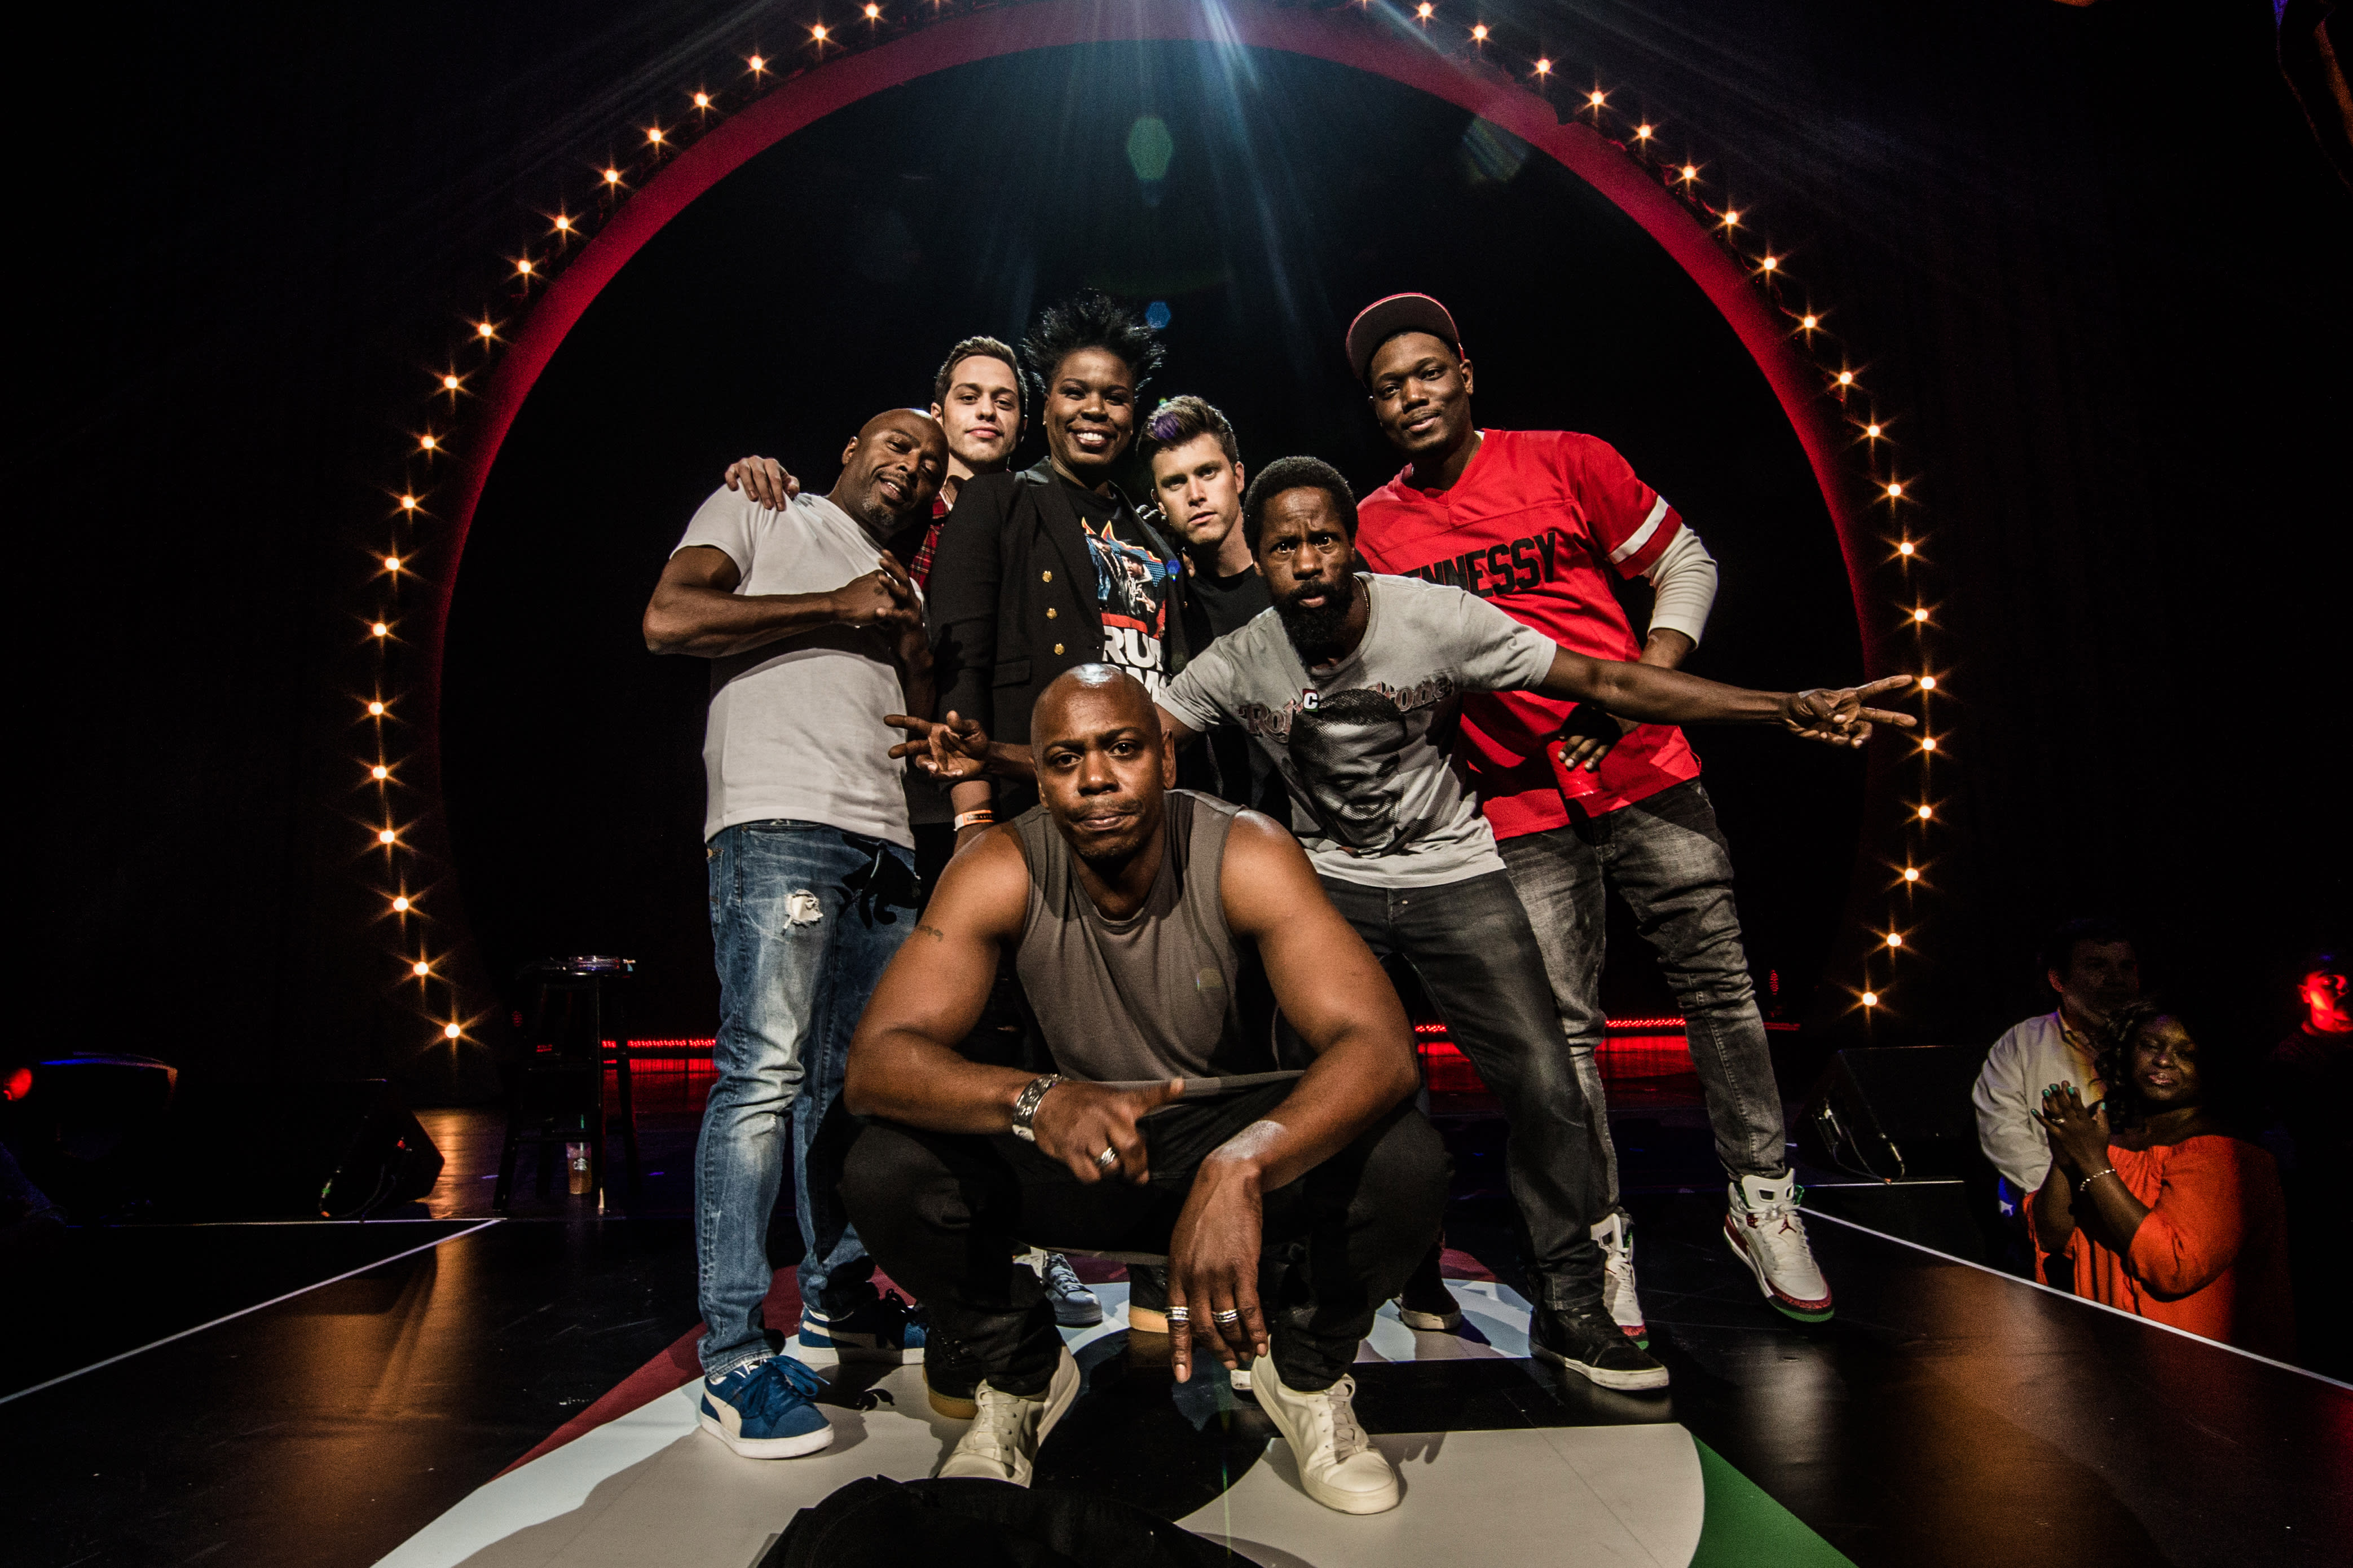 Donnell Rawlings, Pete Davidson, Leslie Jones, Colin Jost, Michael Che, and Dave Chappelle